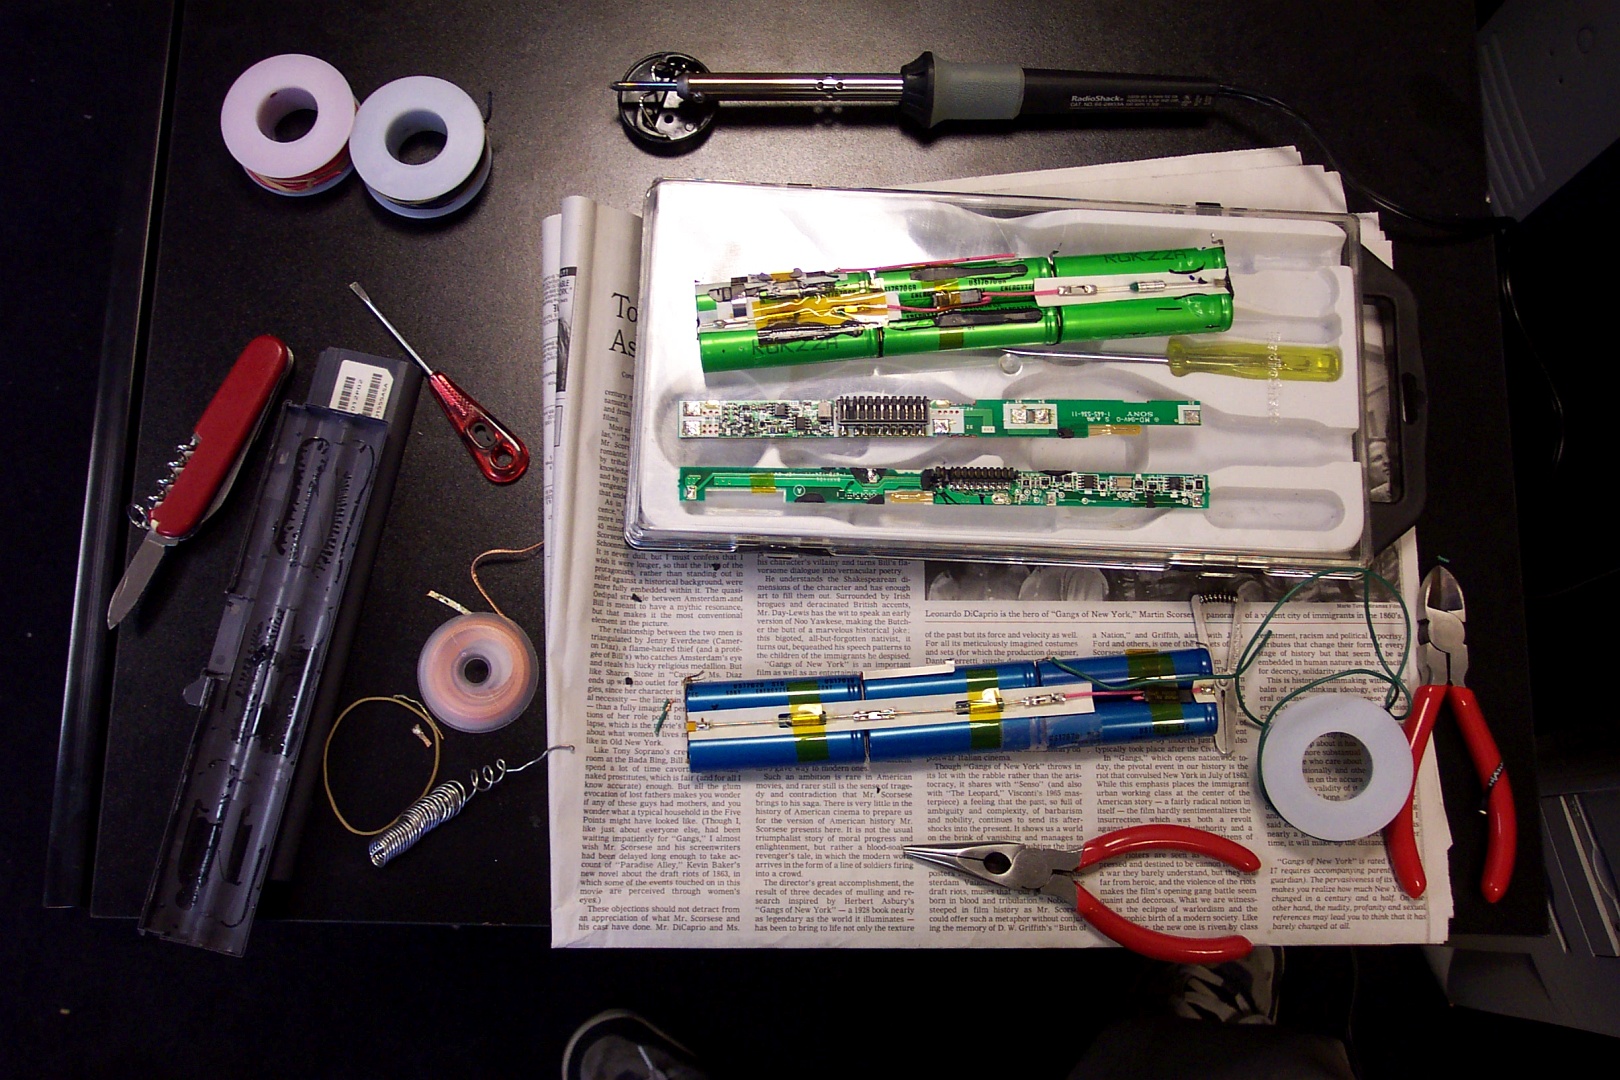 The two laptop batteries, disassembled, with the battery management system circuit boards removed from the battery cells.